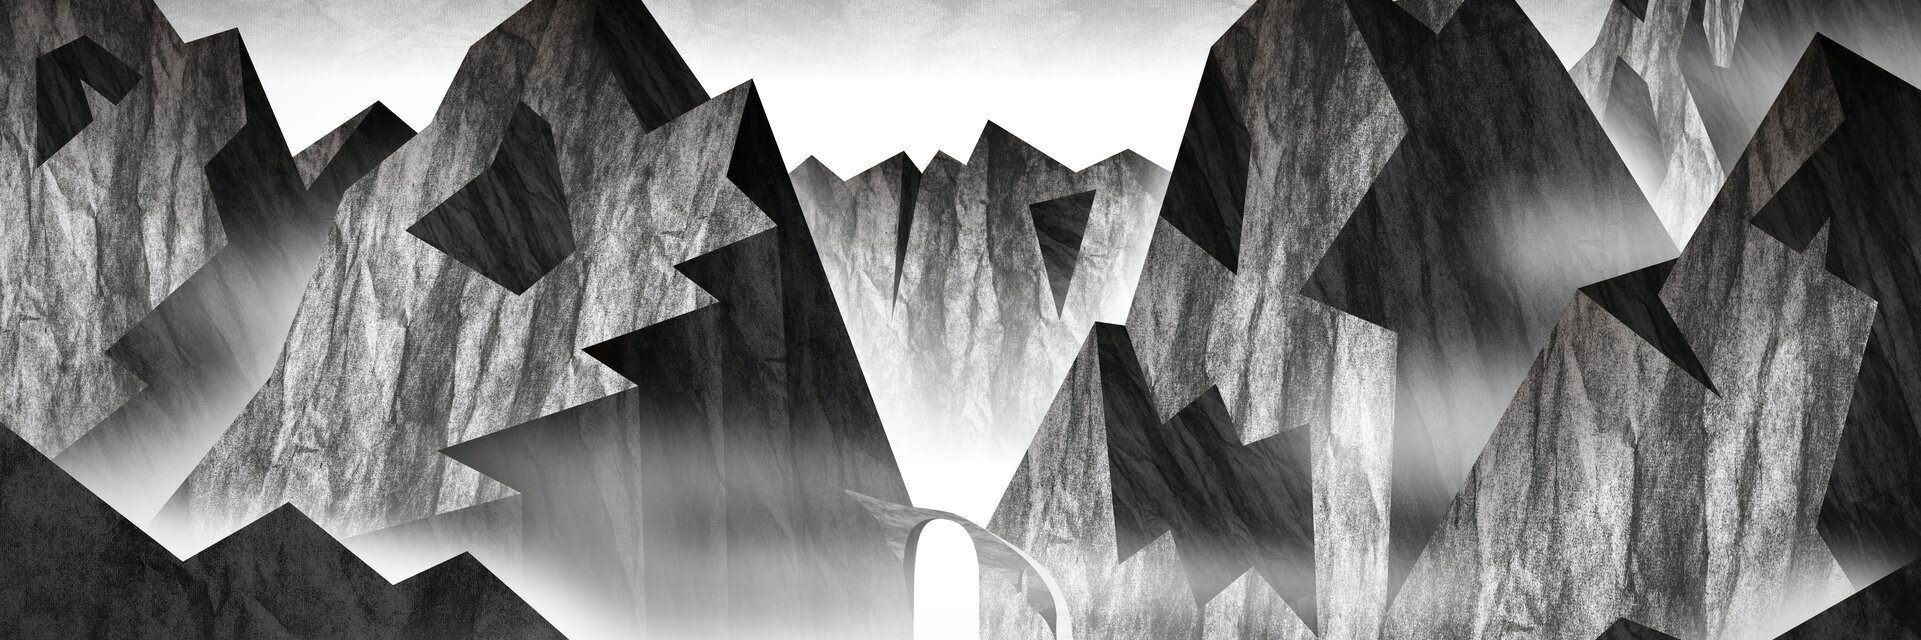 Key visual of the exhibition "Legendary Alpine Space" grey mountain landscape with shadowy faces